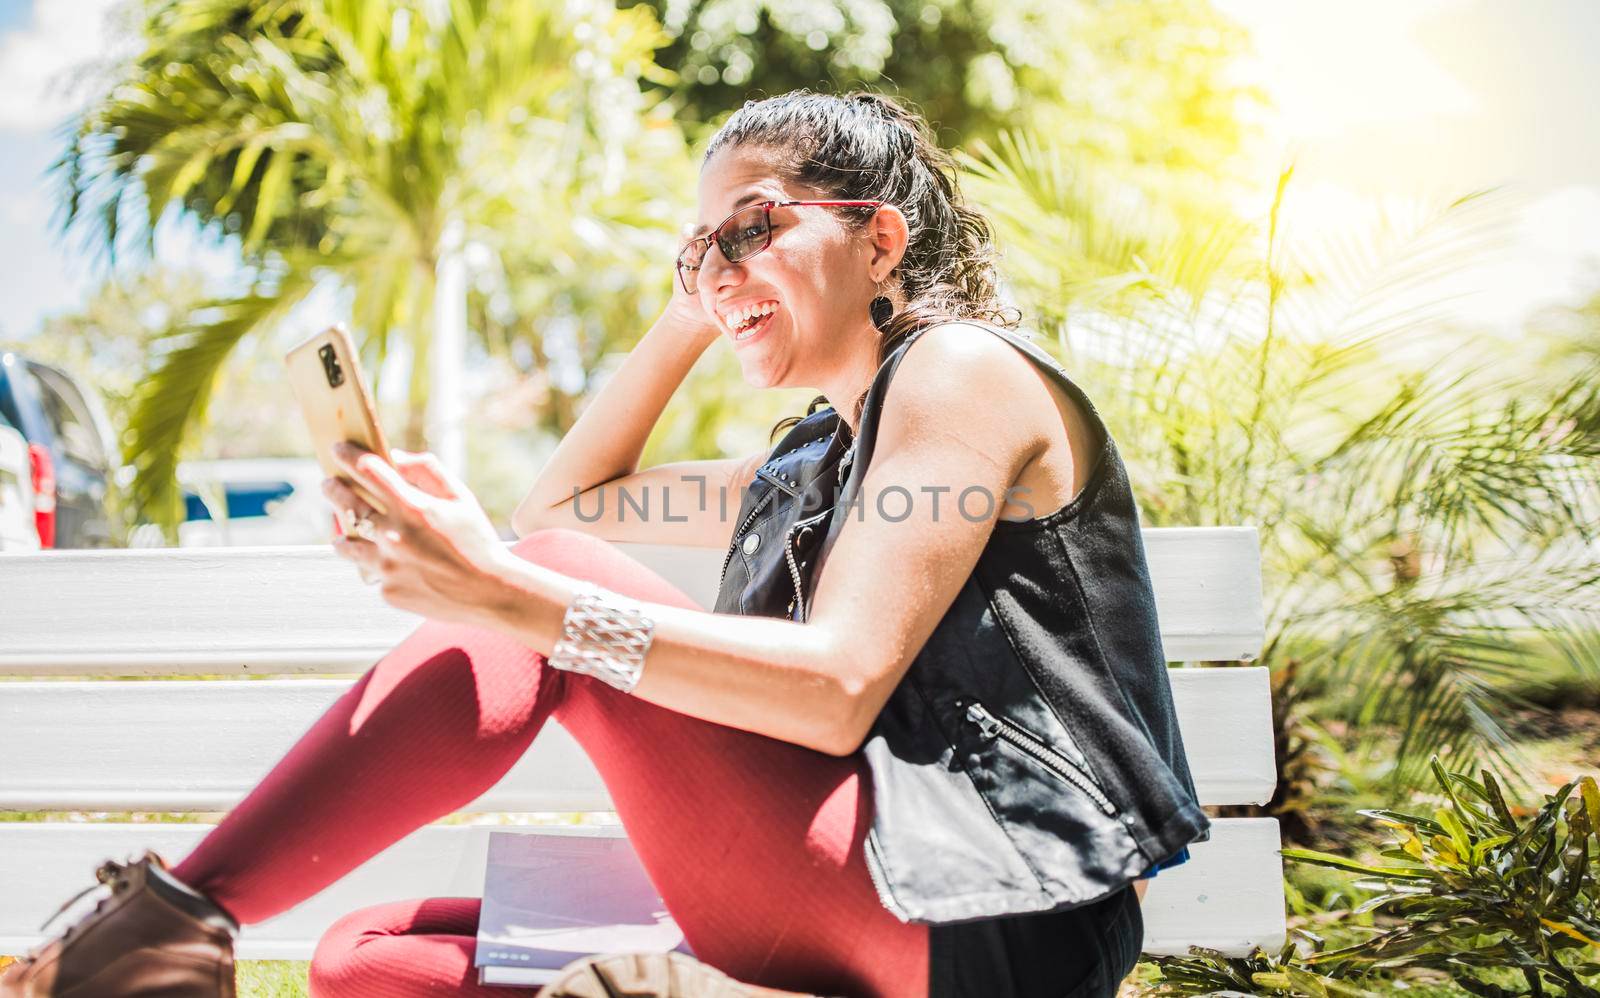 Girl sitting on a bench checking her cell phone, Happy woman sitting in a park texting on her cell phone, Happy woman sitting on a bench sending a text message